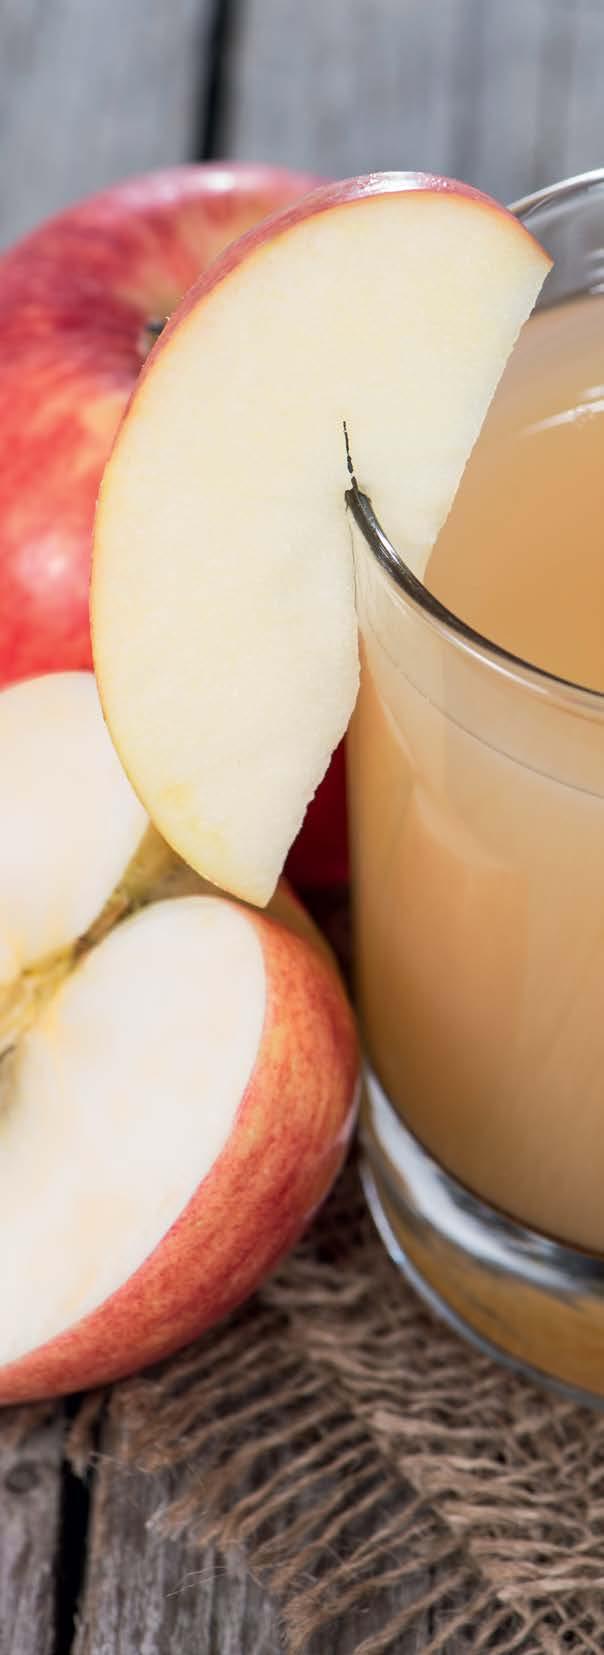 Production of naturally cloudy apple juice Fully ripe (low starch content), sound and washed Panzym YieldMASH XXL enzyme: 0.92 1.53 fl oz/short ton (30 50 ml/t) Panzym First Yield enzyme: 1.23 1.